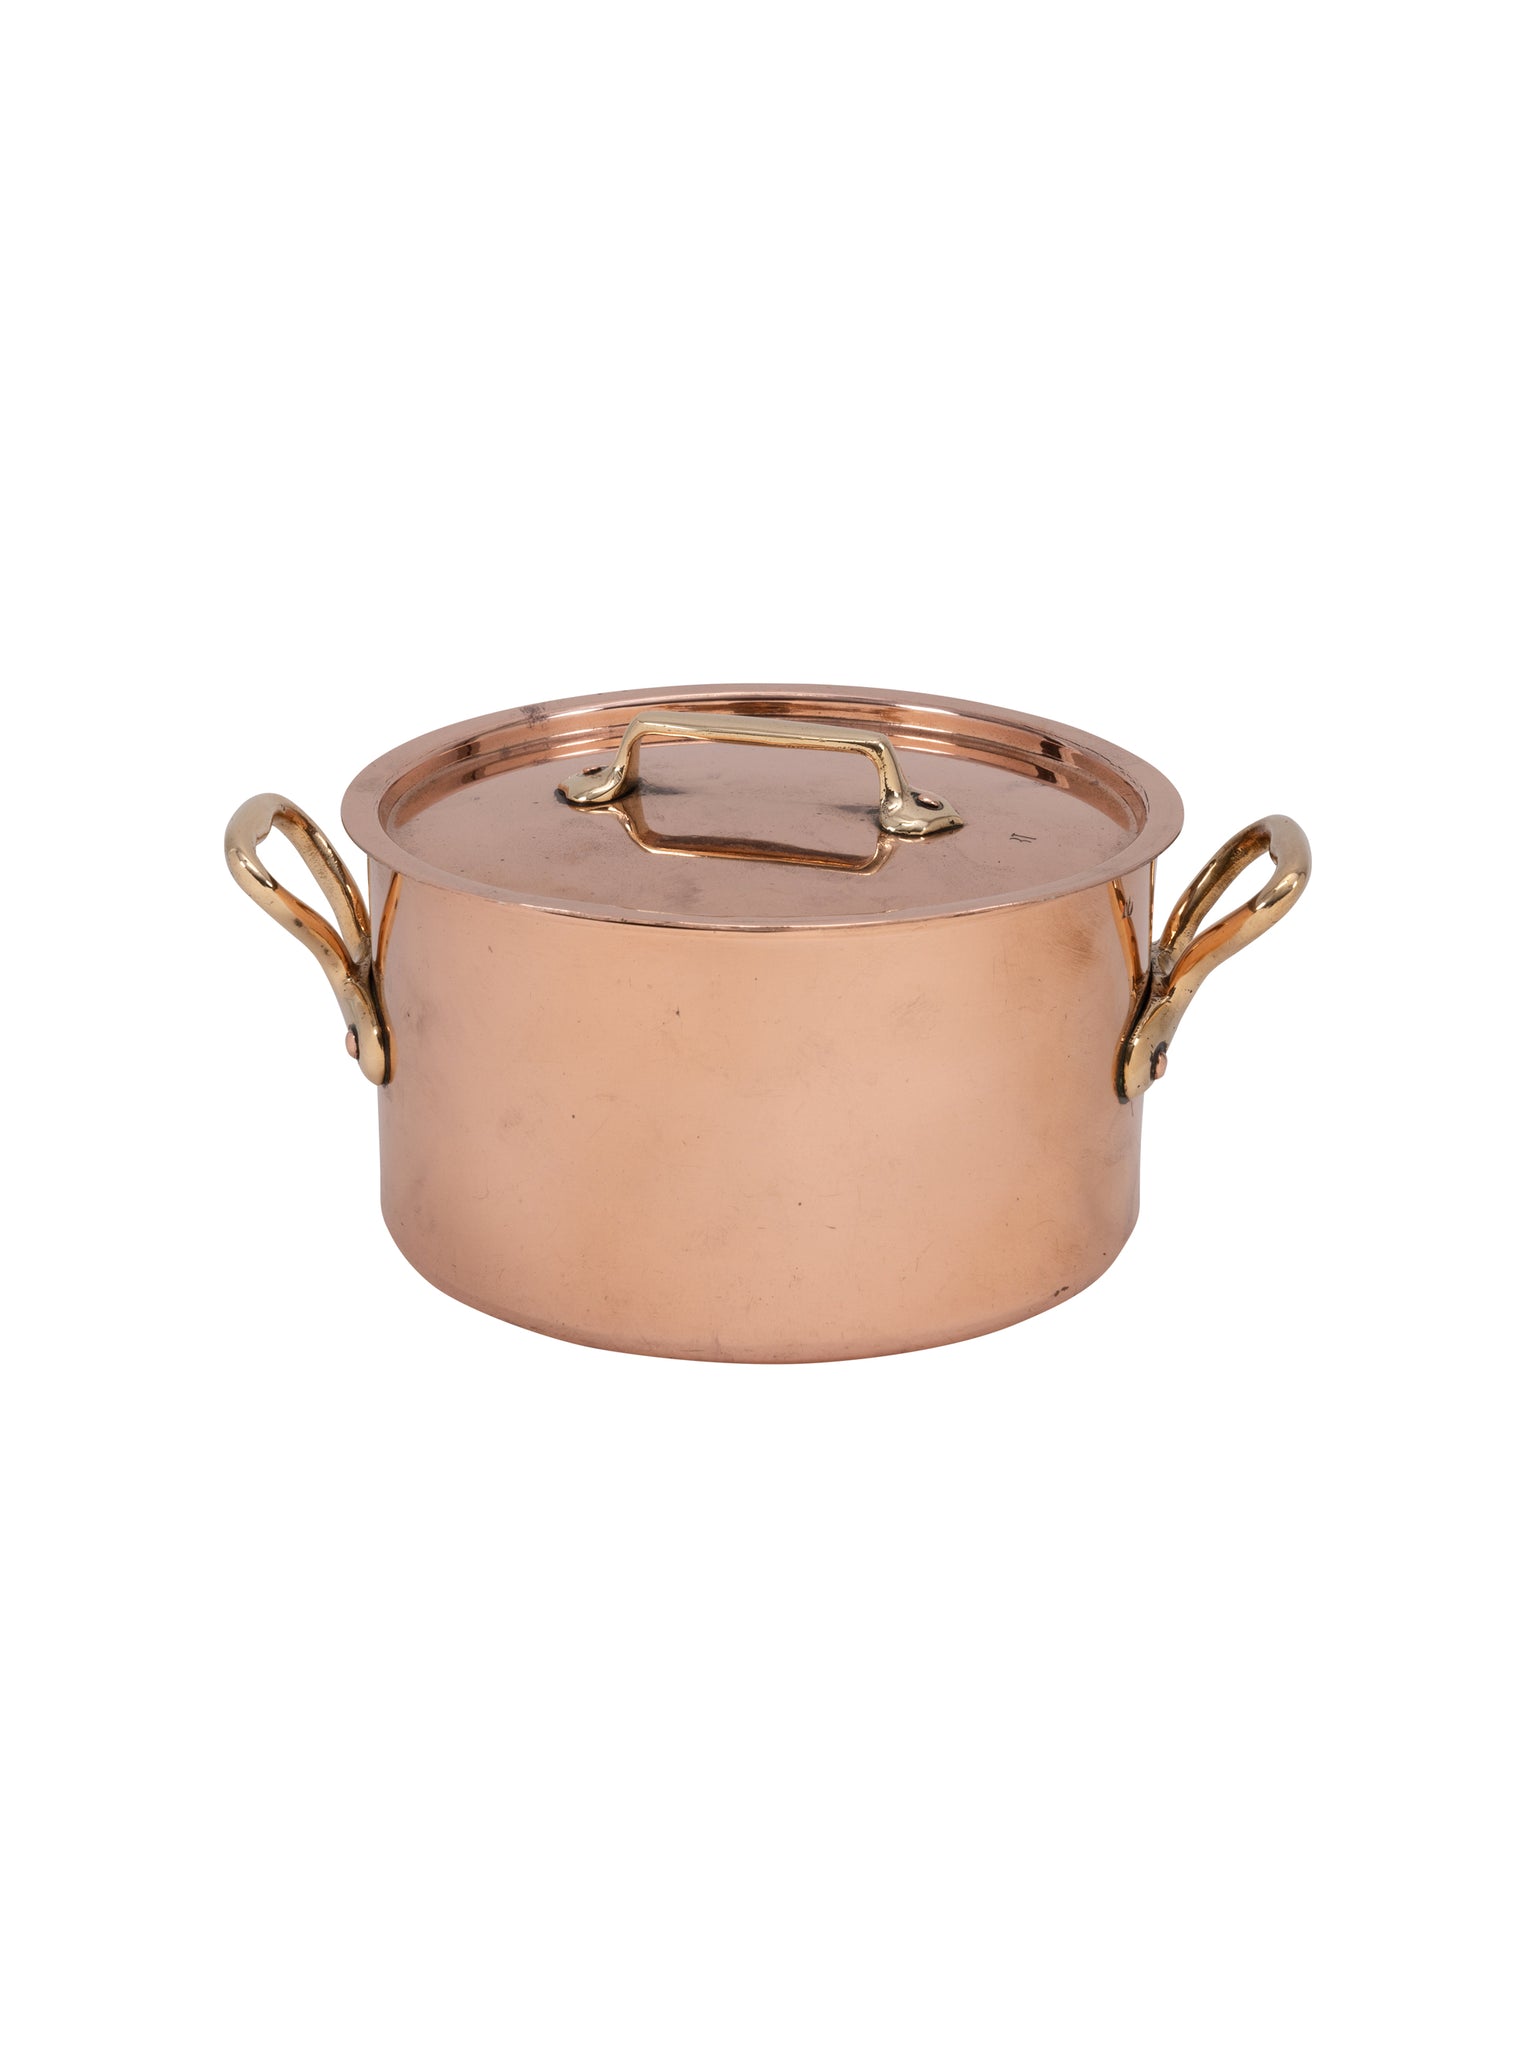 Vintage 1920s French Copper Casserole Weston Table